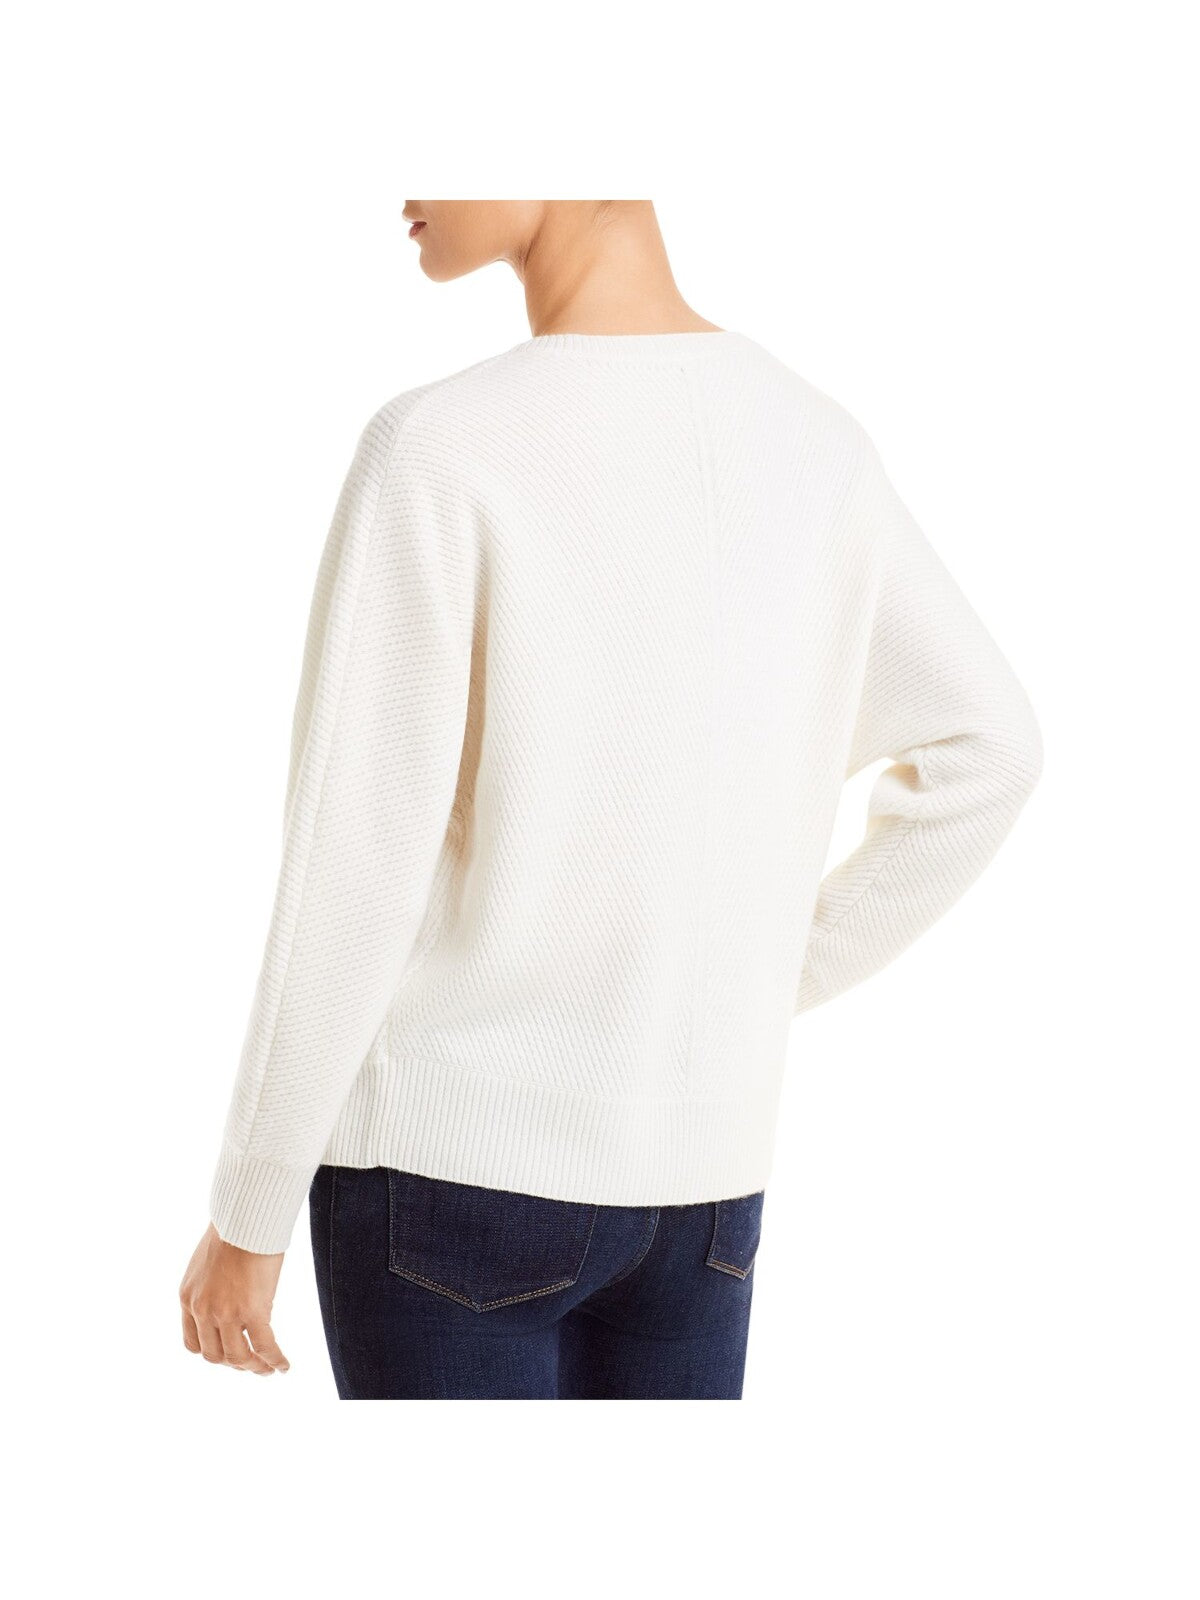 C Womens Ivory Ribbed Textured Novelty Stitch Long Sleeve Scoop Neck Sweater L